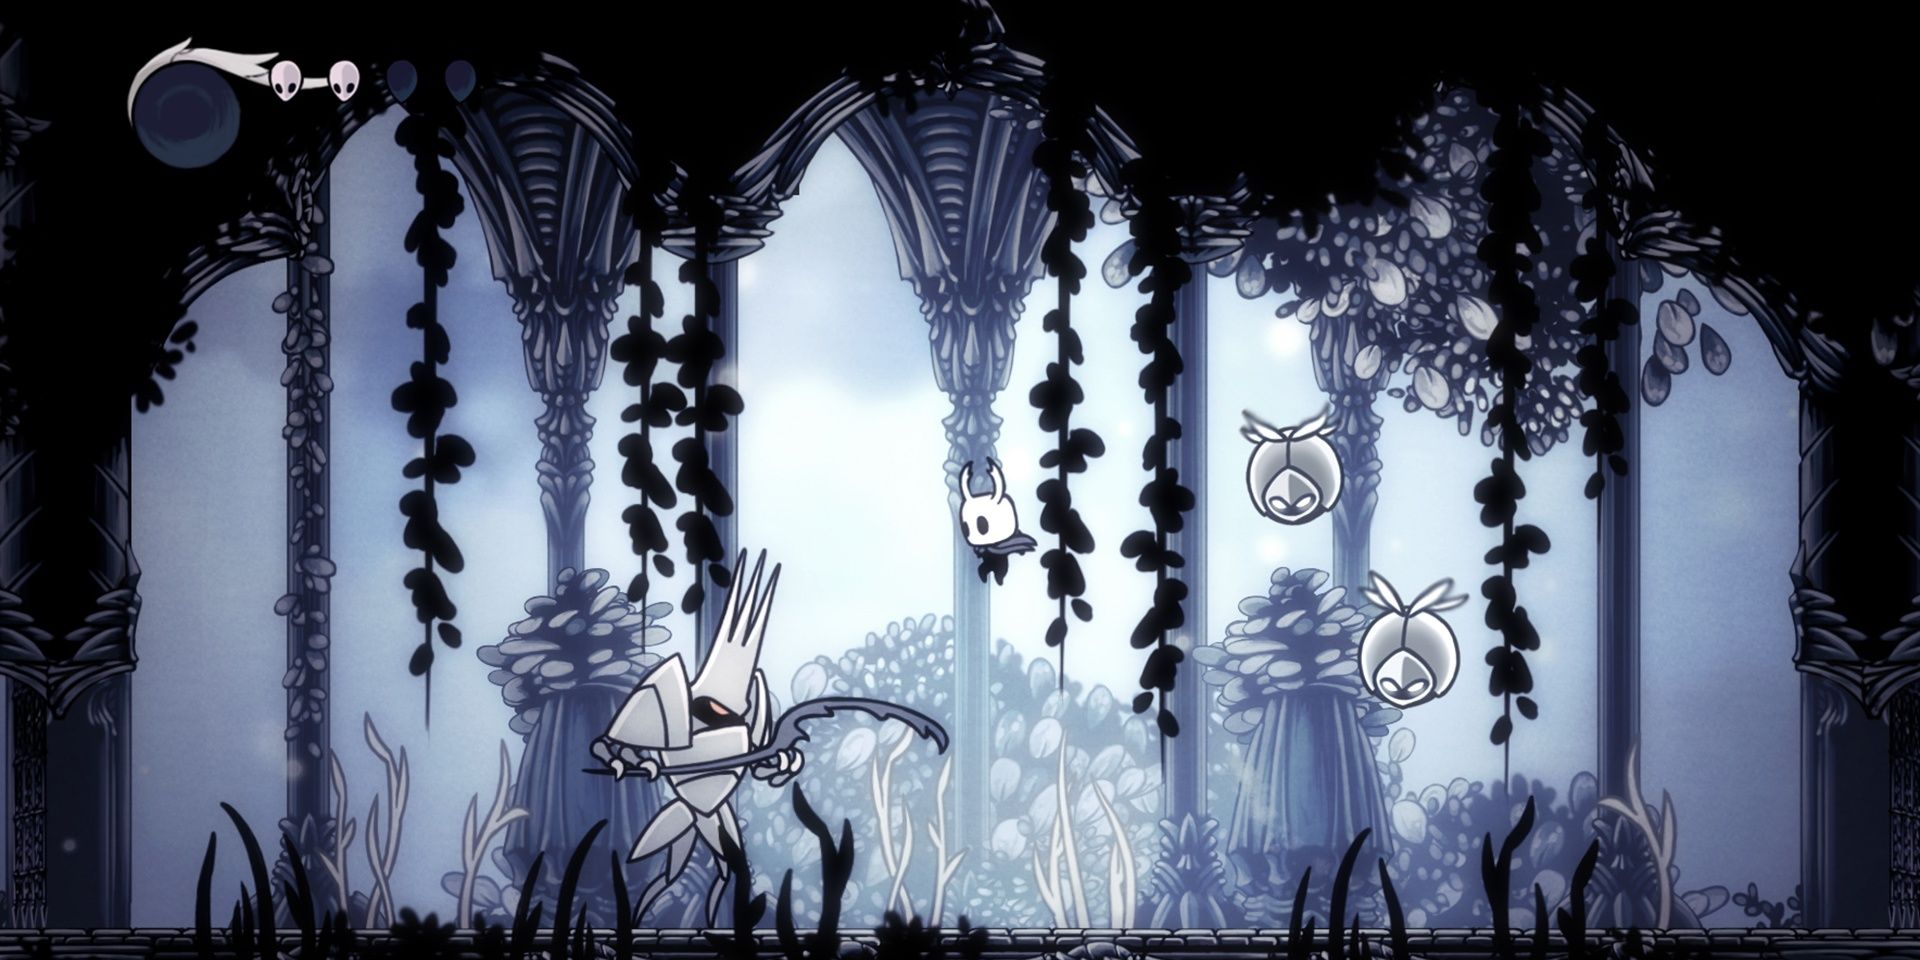 Knight in Hollow Knight fighting off insect-like enemies